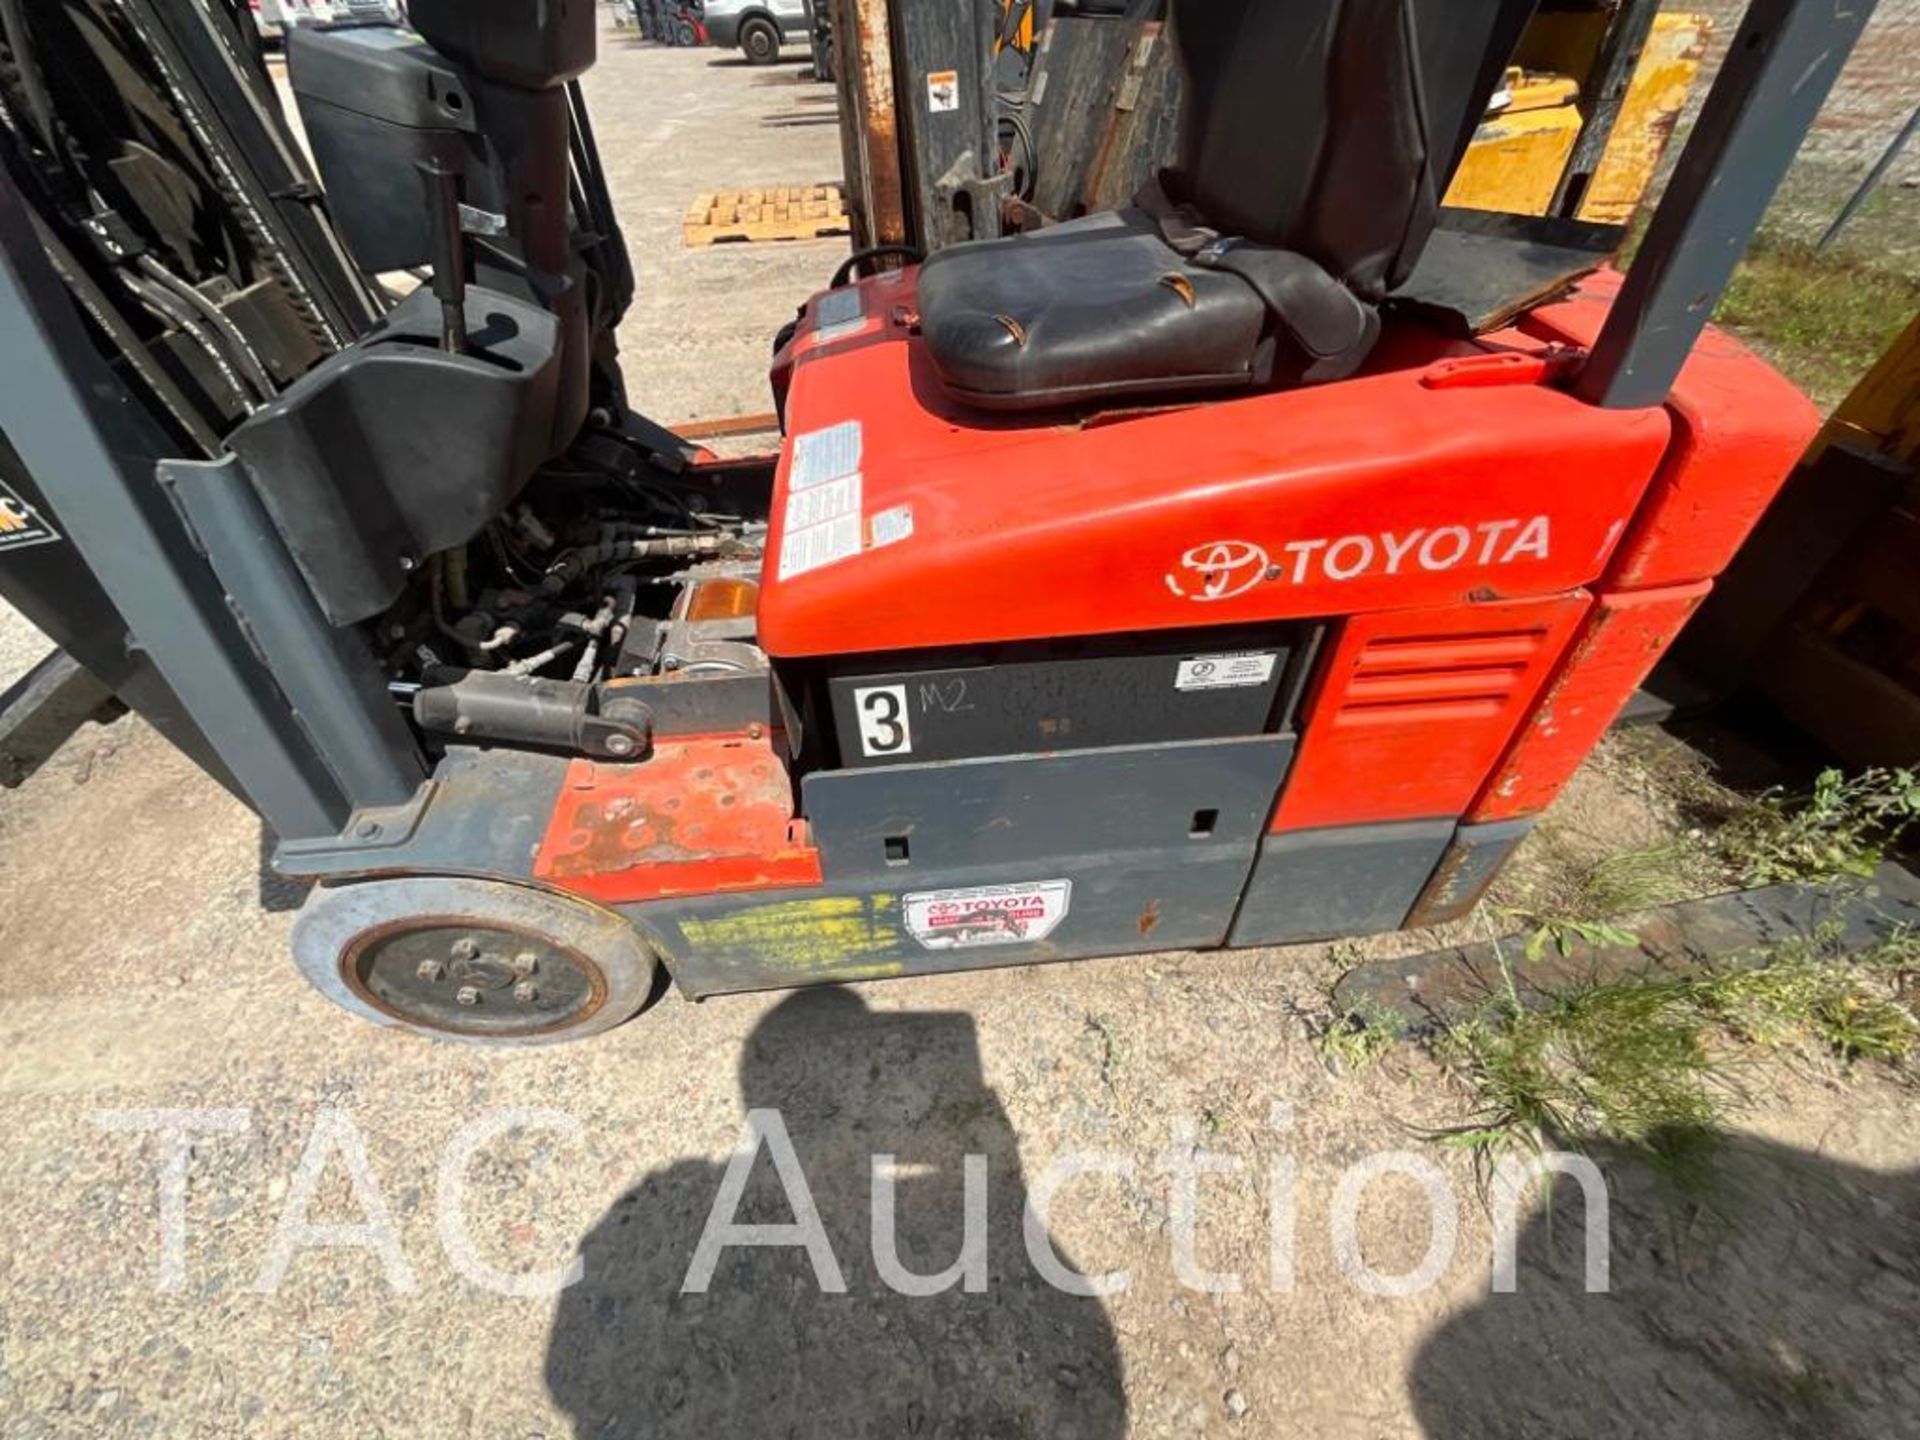 Toyota 2FBEU18 Electric Forklift - Image 8 of 28